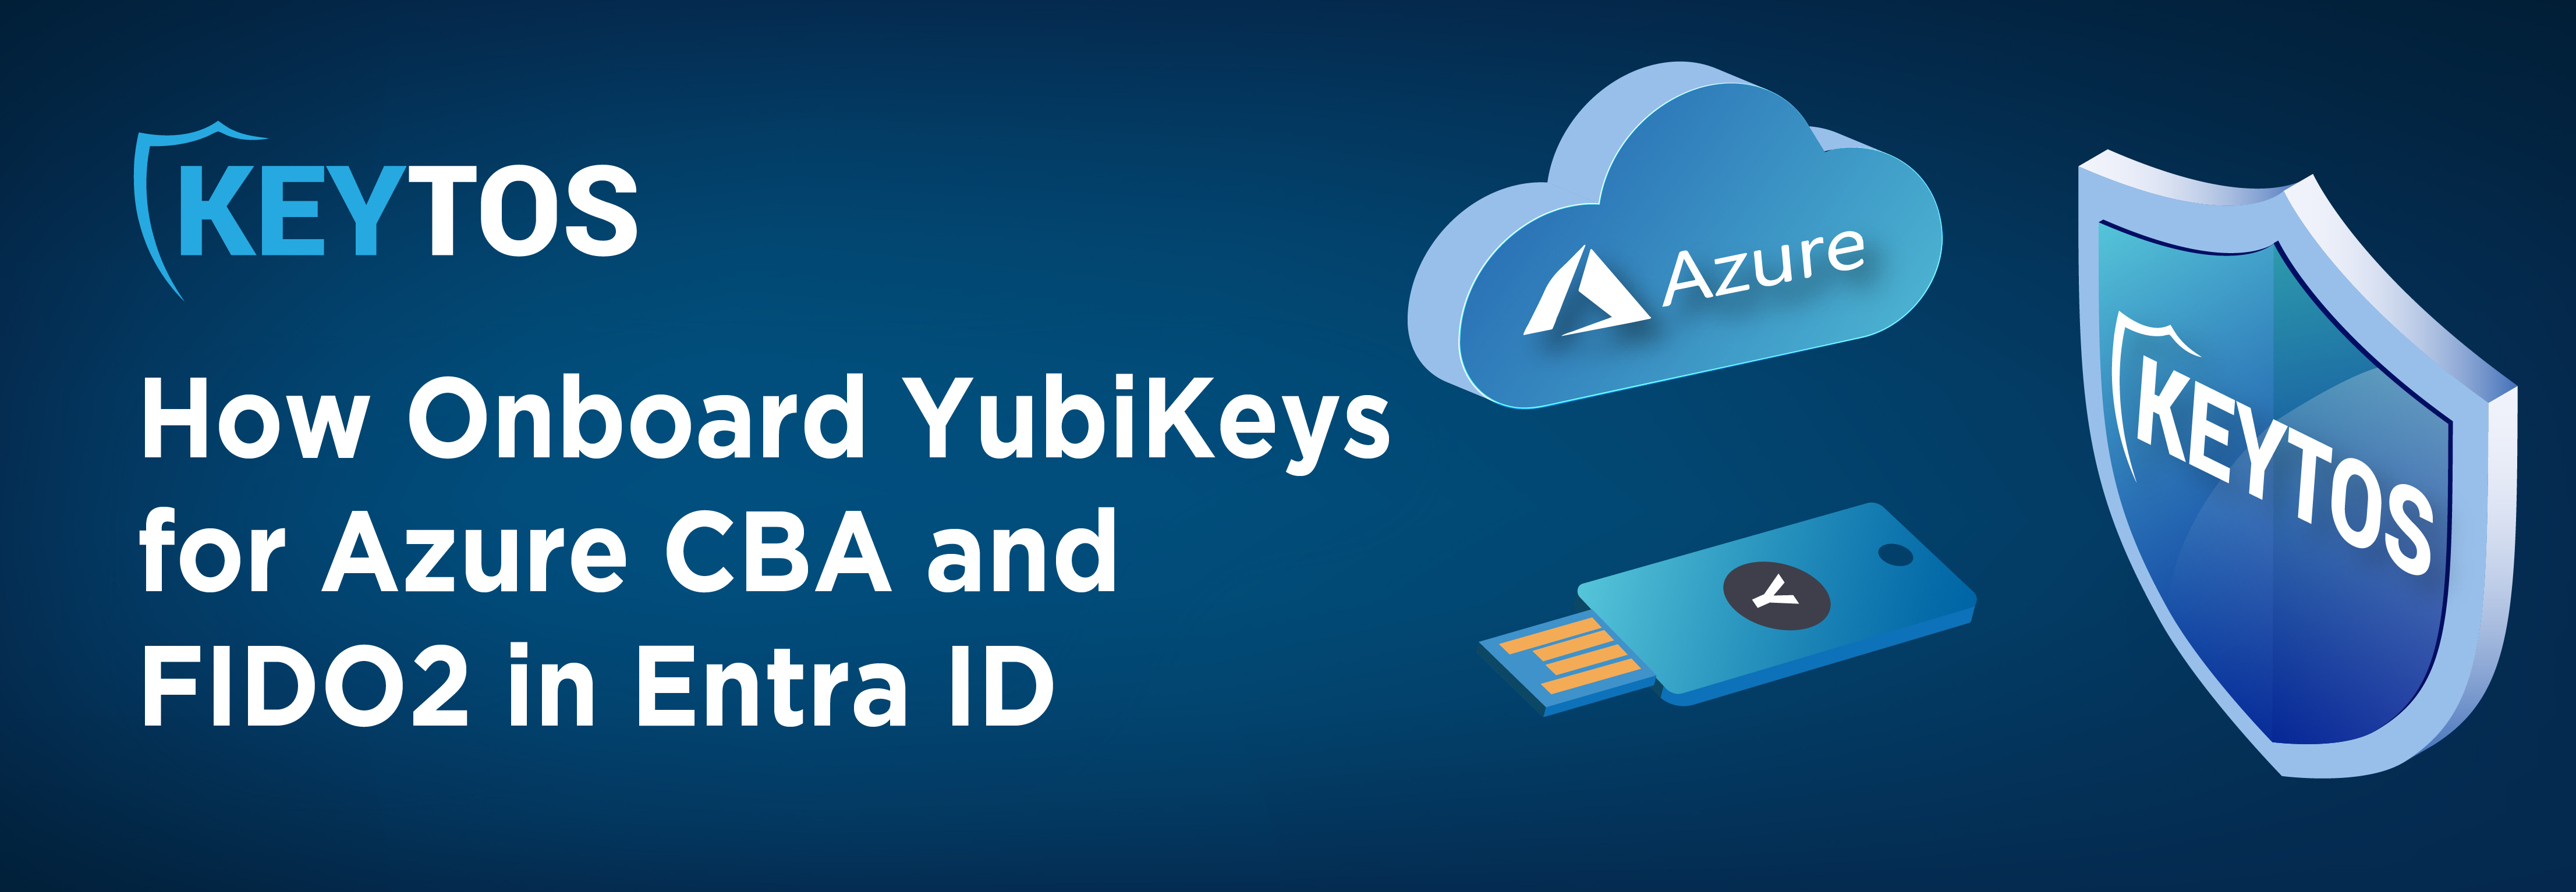 How to enable passwordless authentication in Azure AD and Entra ID with FIDO2 and Azure CBA using Yubikeys